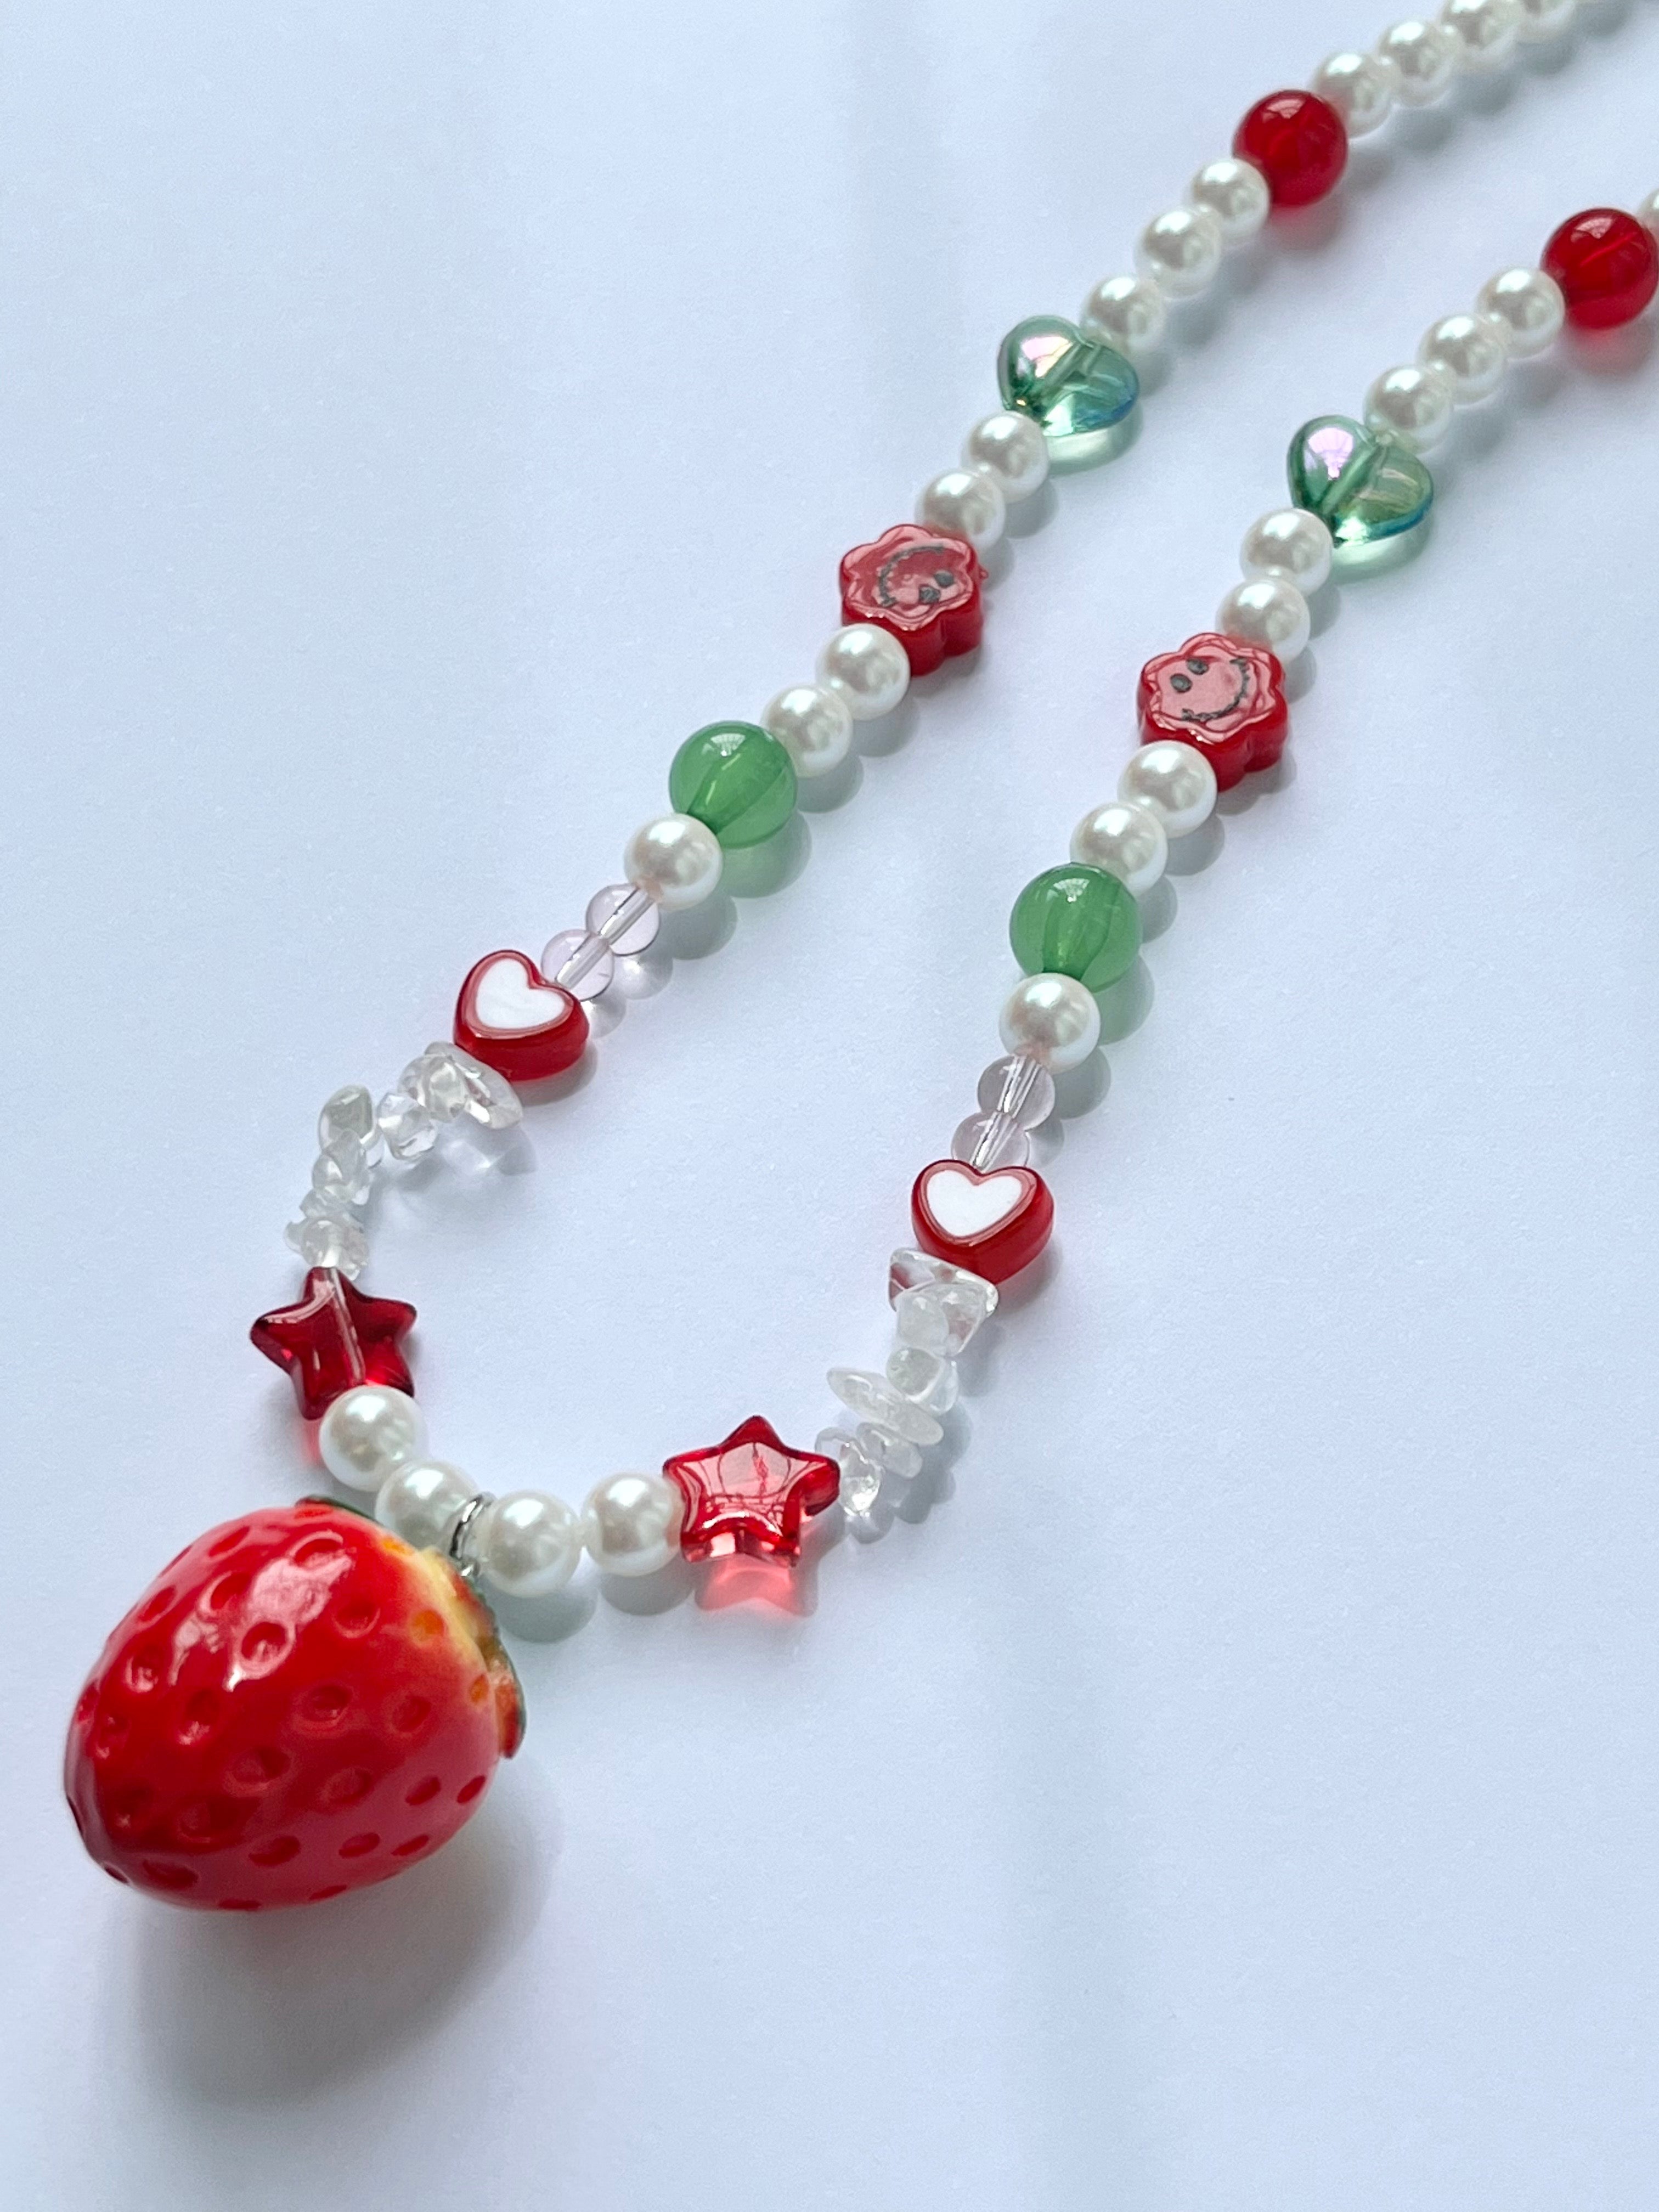 [STAYC sumin/Rocket Punch Juri] MADE strawberry red Necklace